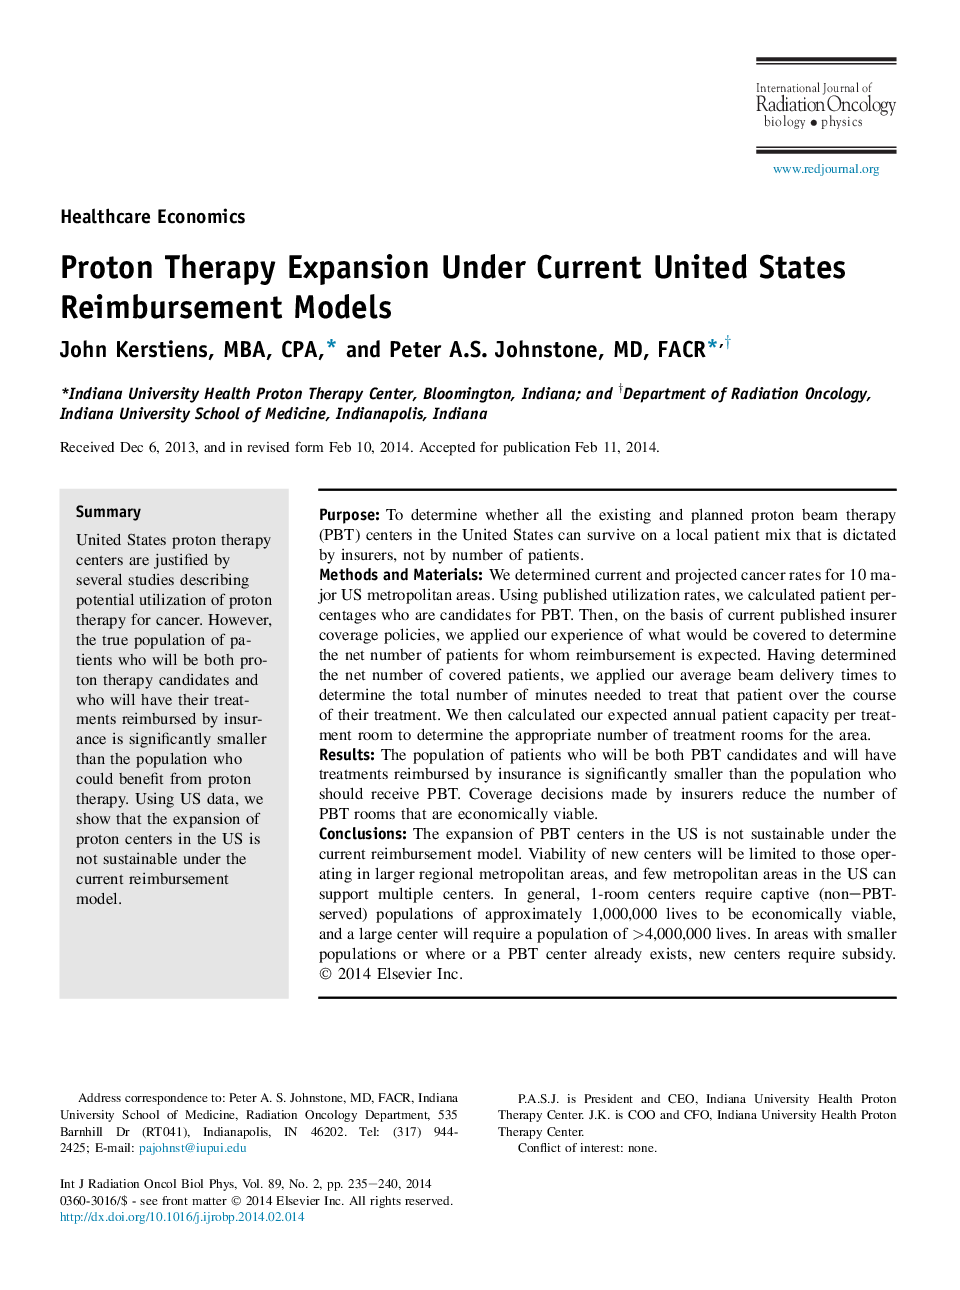 Proton Therapy Expansion Under Current United States Reimbursement Models